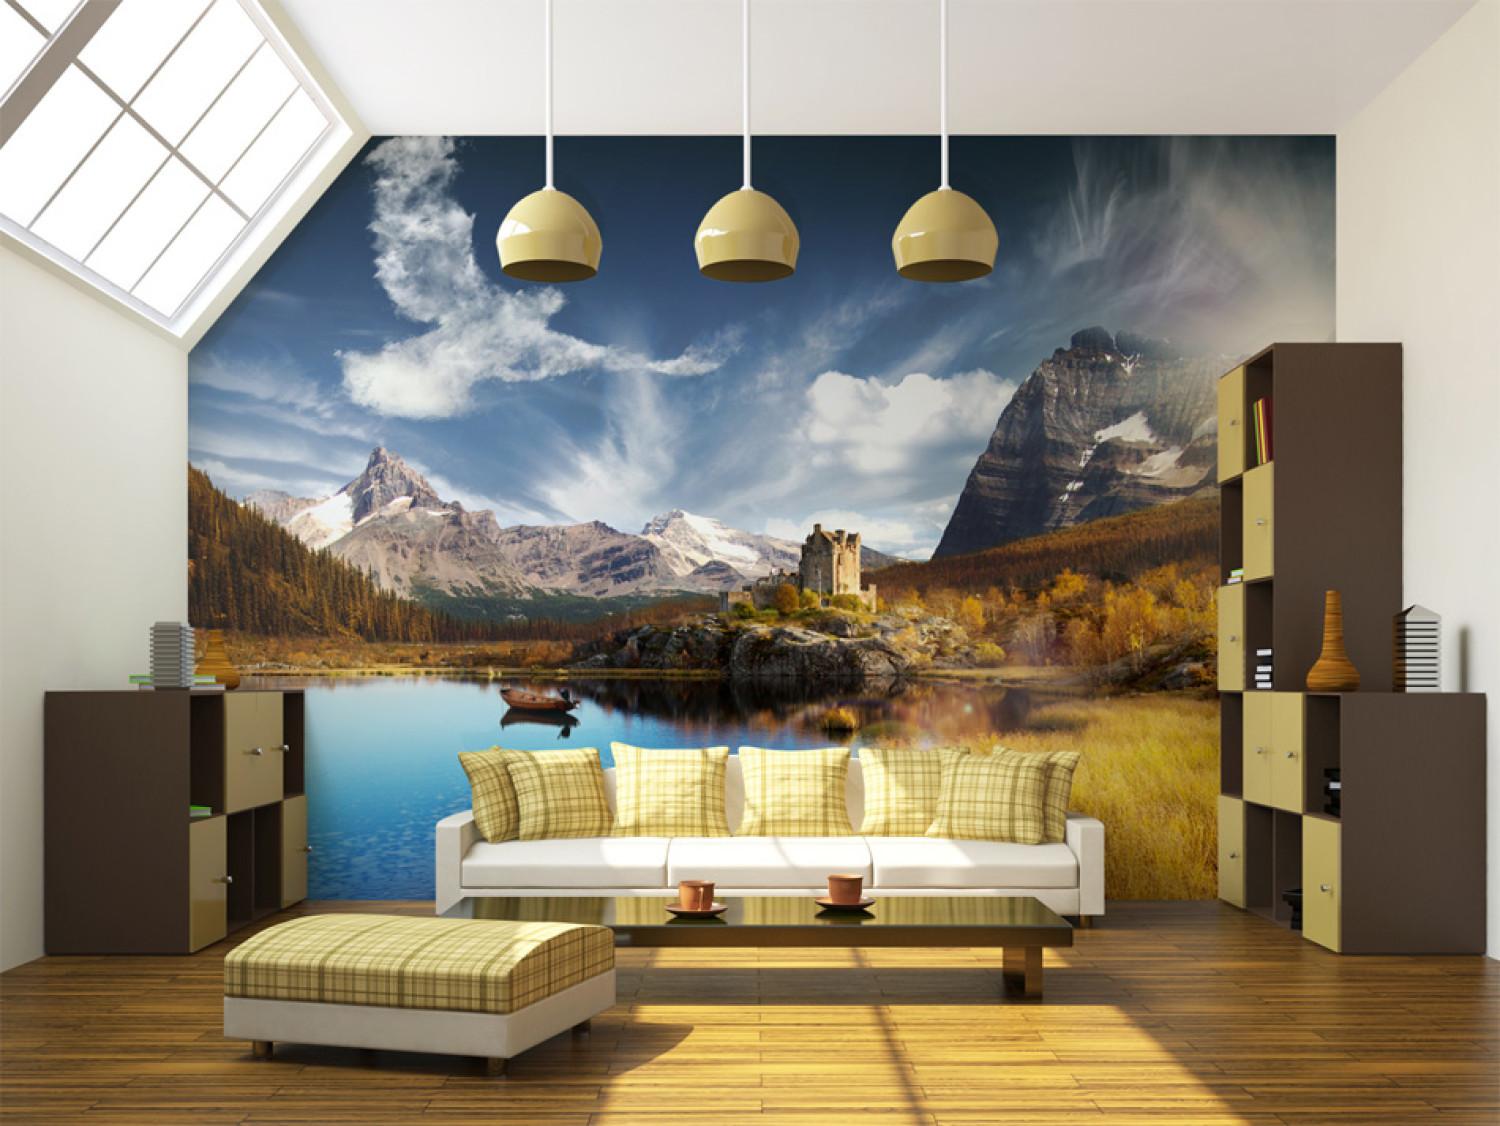 Wall Mural Clouds - Landscape of High Mountains over a Lake under a Blue Sky